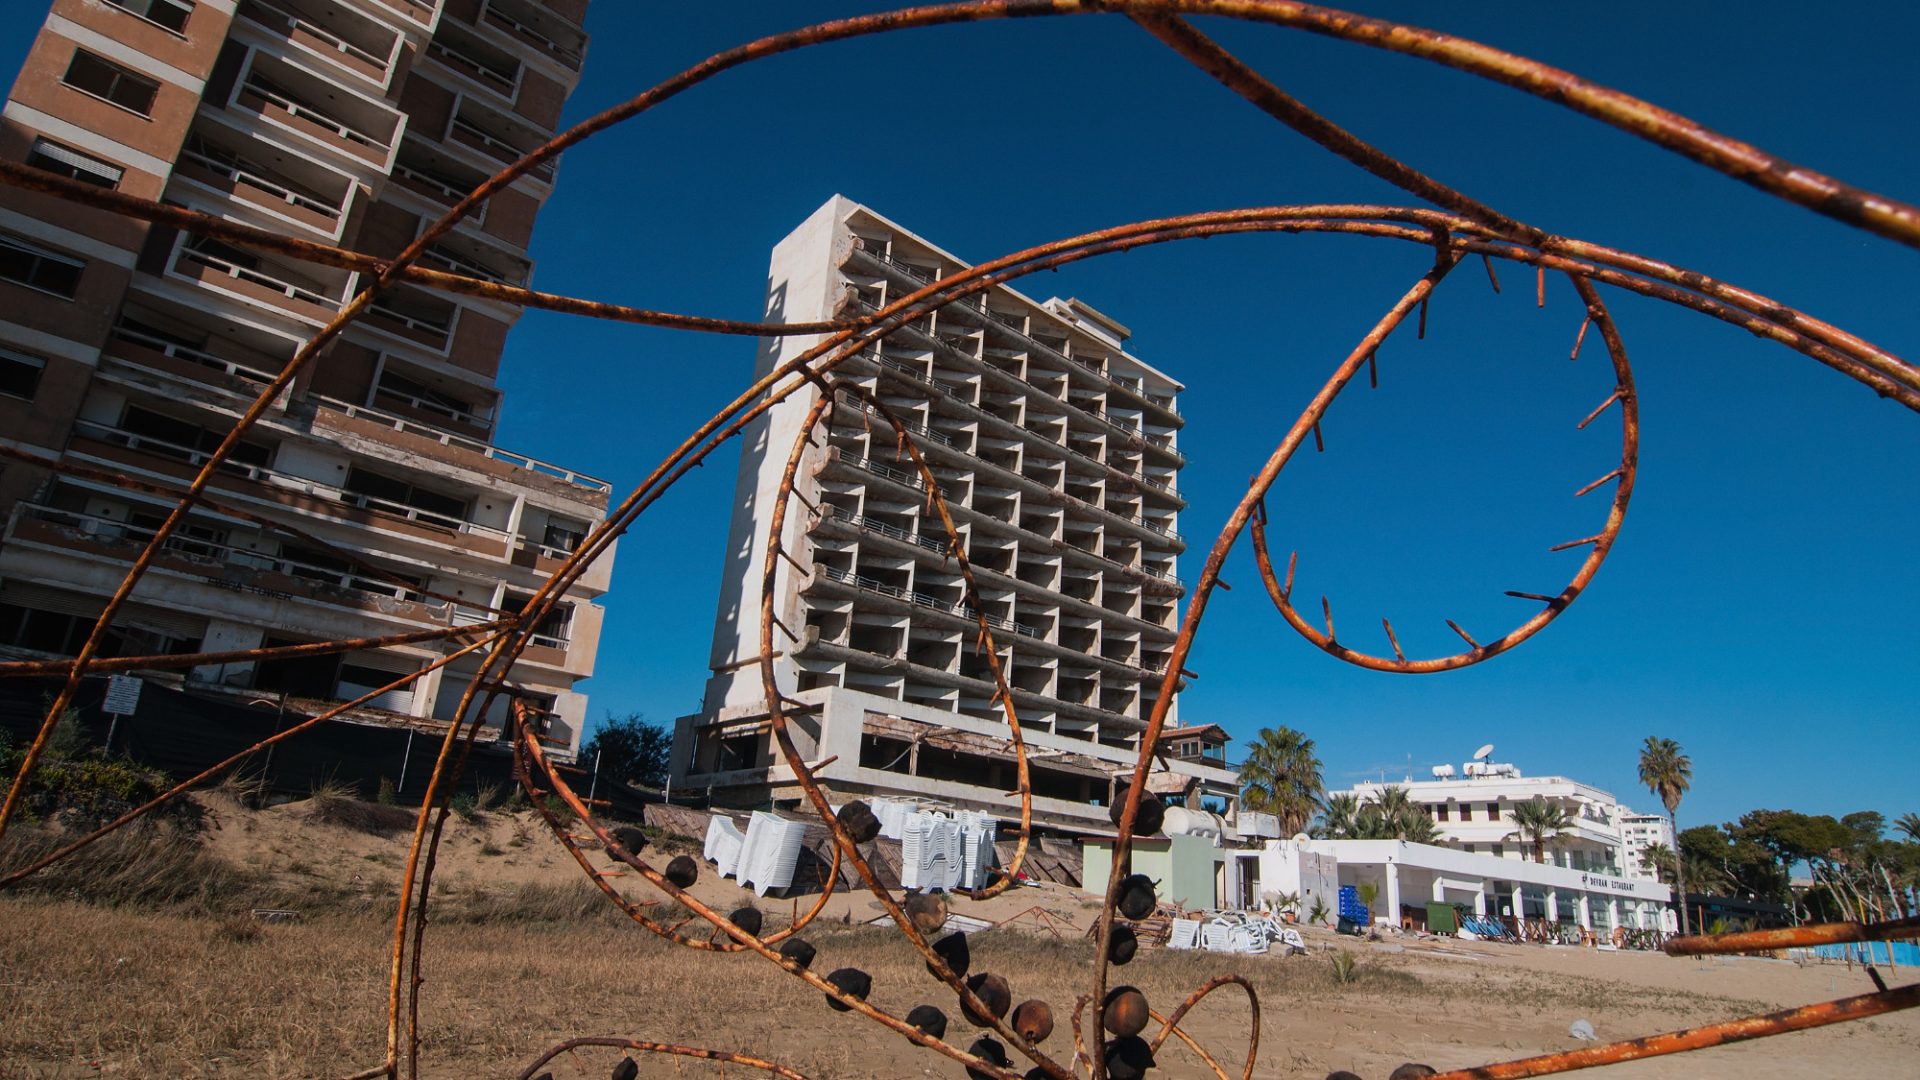 Barbed wire and an abandoned hotel in the Varosha quarter of Famagusta, Cyprus. Prior to the Turkish invasion in 1974, Varosha was one of the world’s most important tourist destinations. Photo: Awakening/Getty
